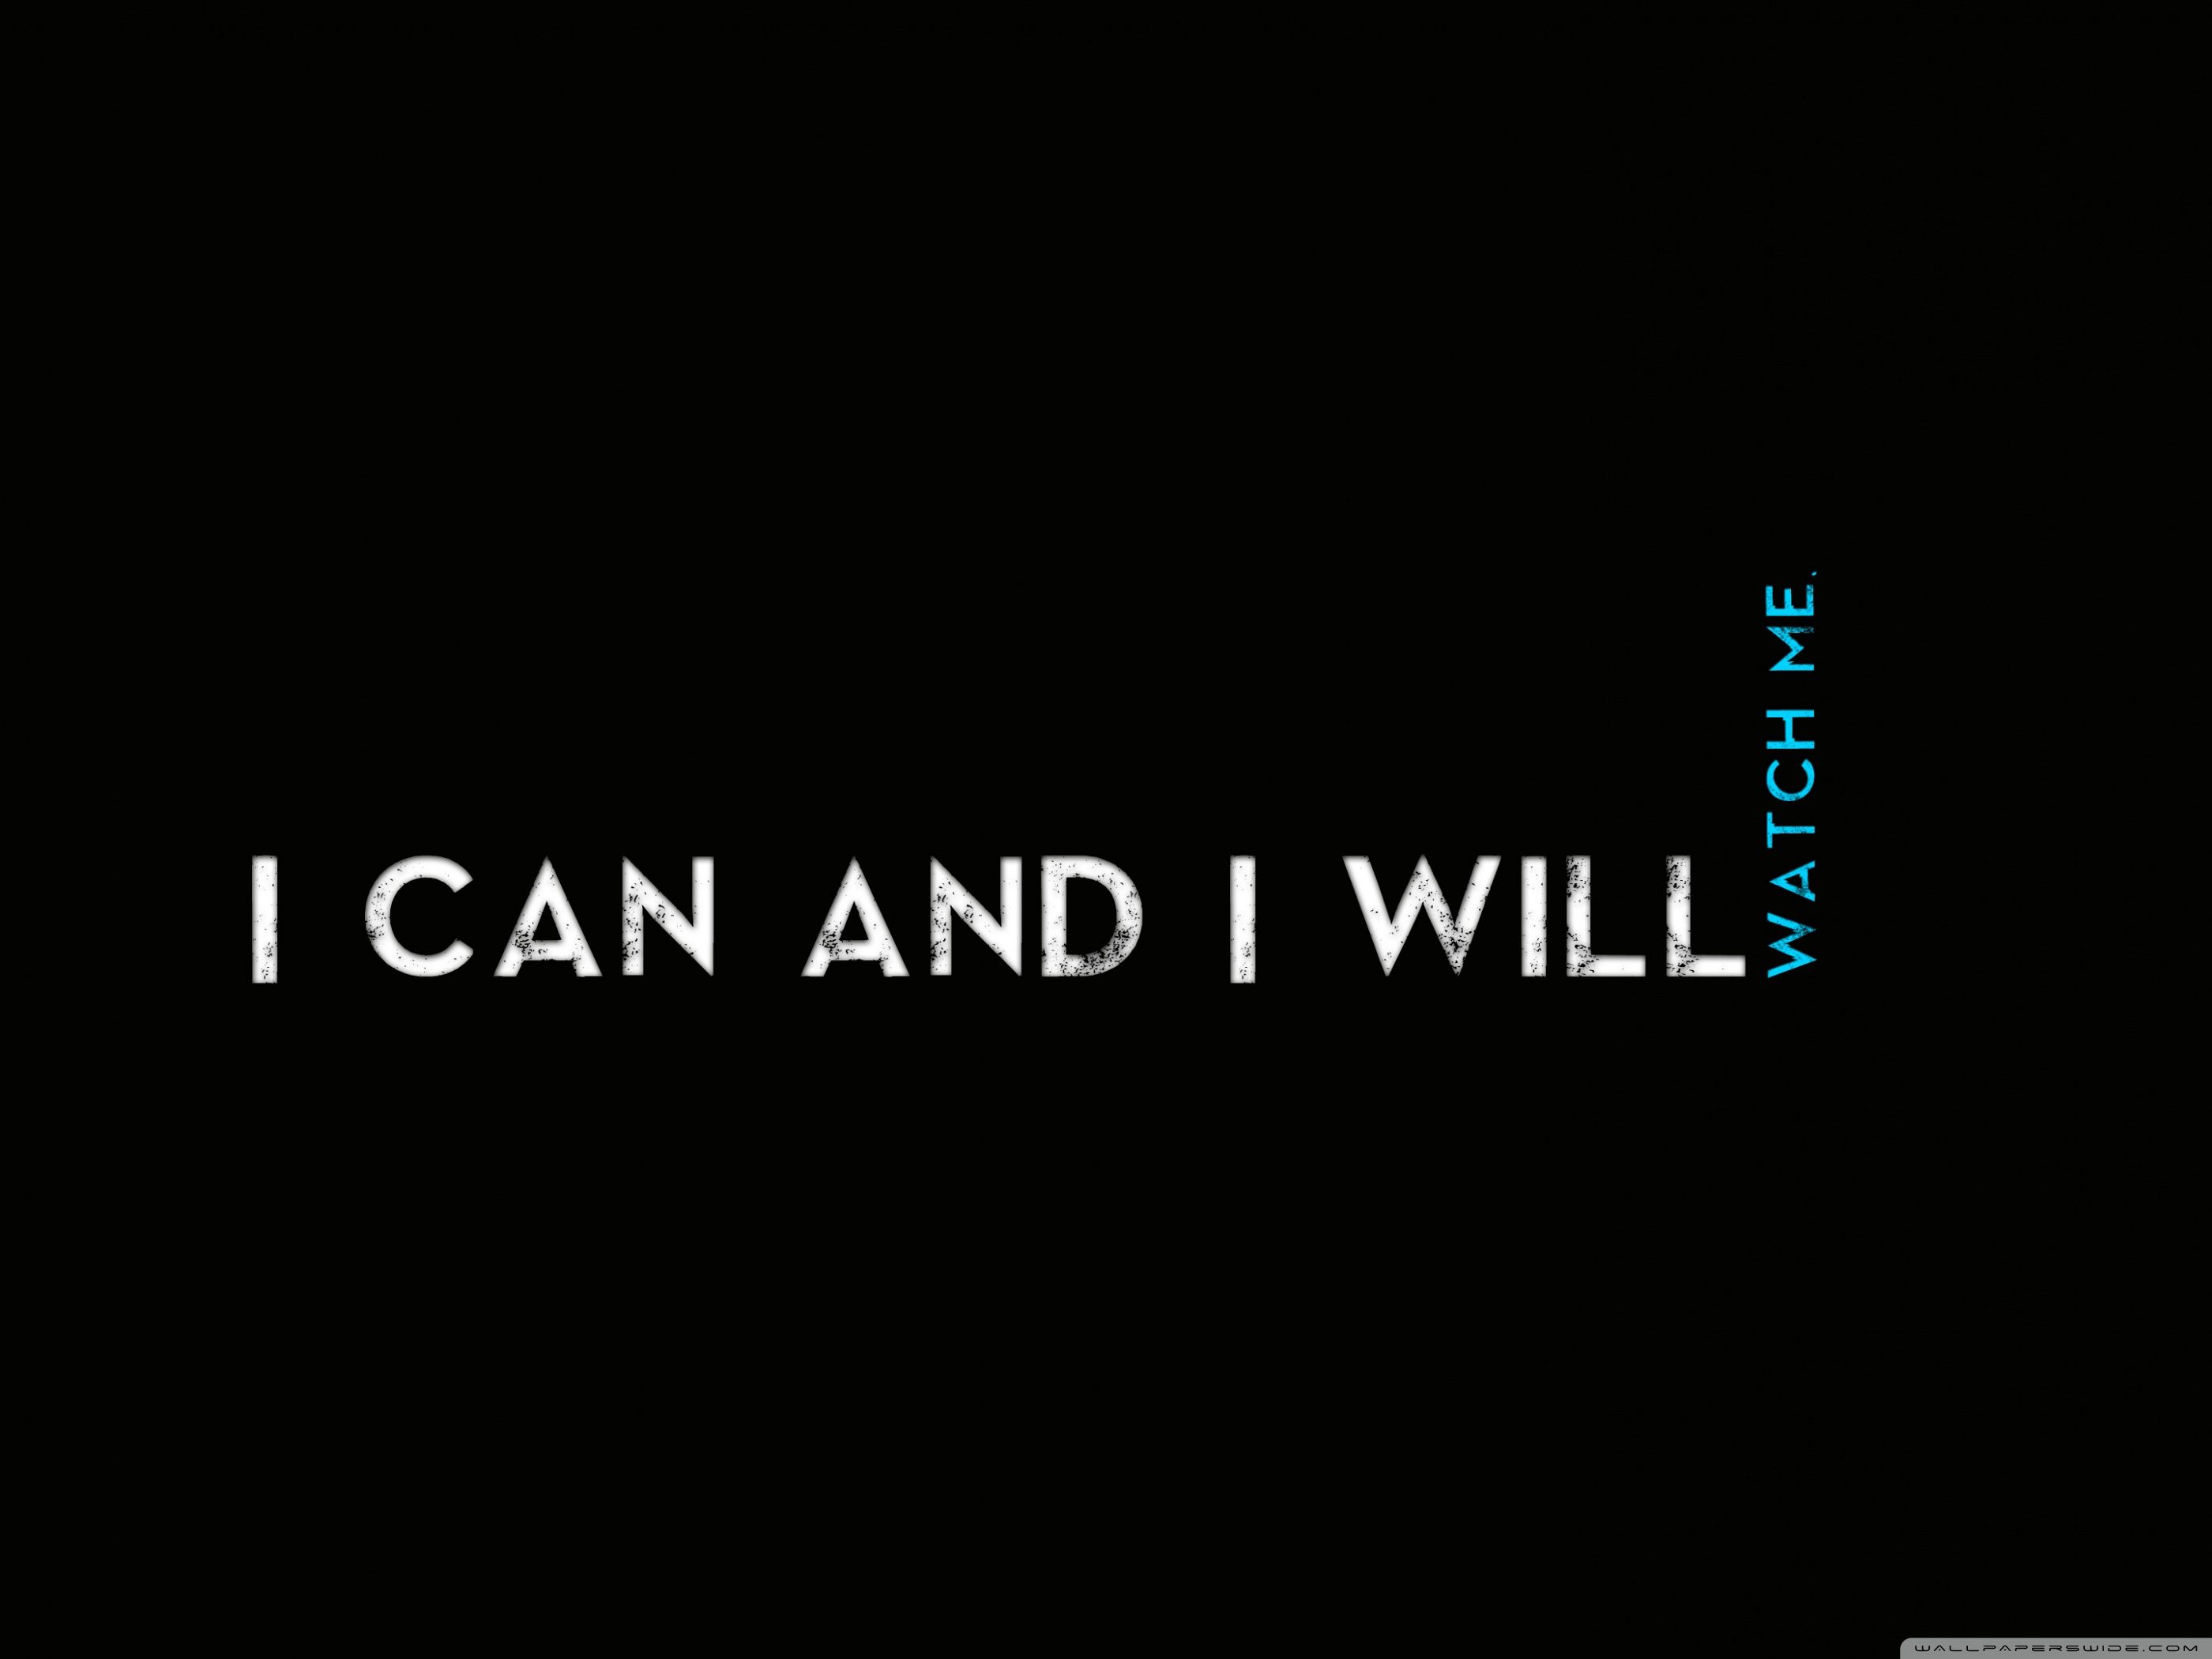 Quotes I CaN AnD I WiLl Ultra HD Desktop Background Wallpaper for 4K UHD TV, Widescreen & UltraWide Desktop & Laptop, Multi Display, Dual Monitor, Tablet